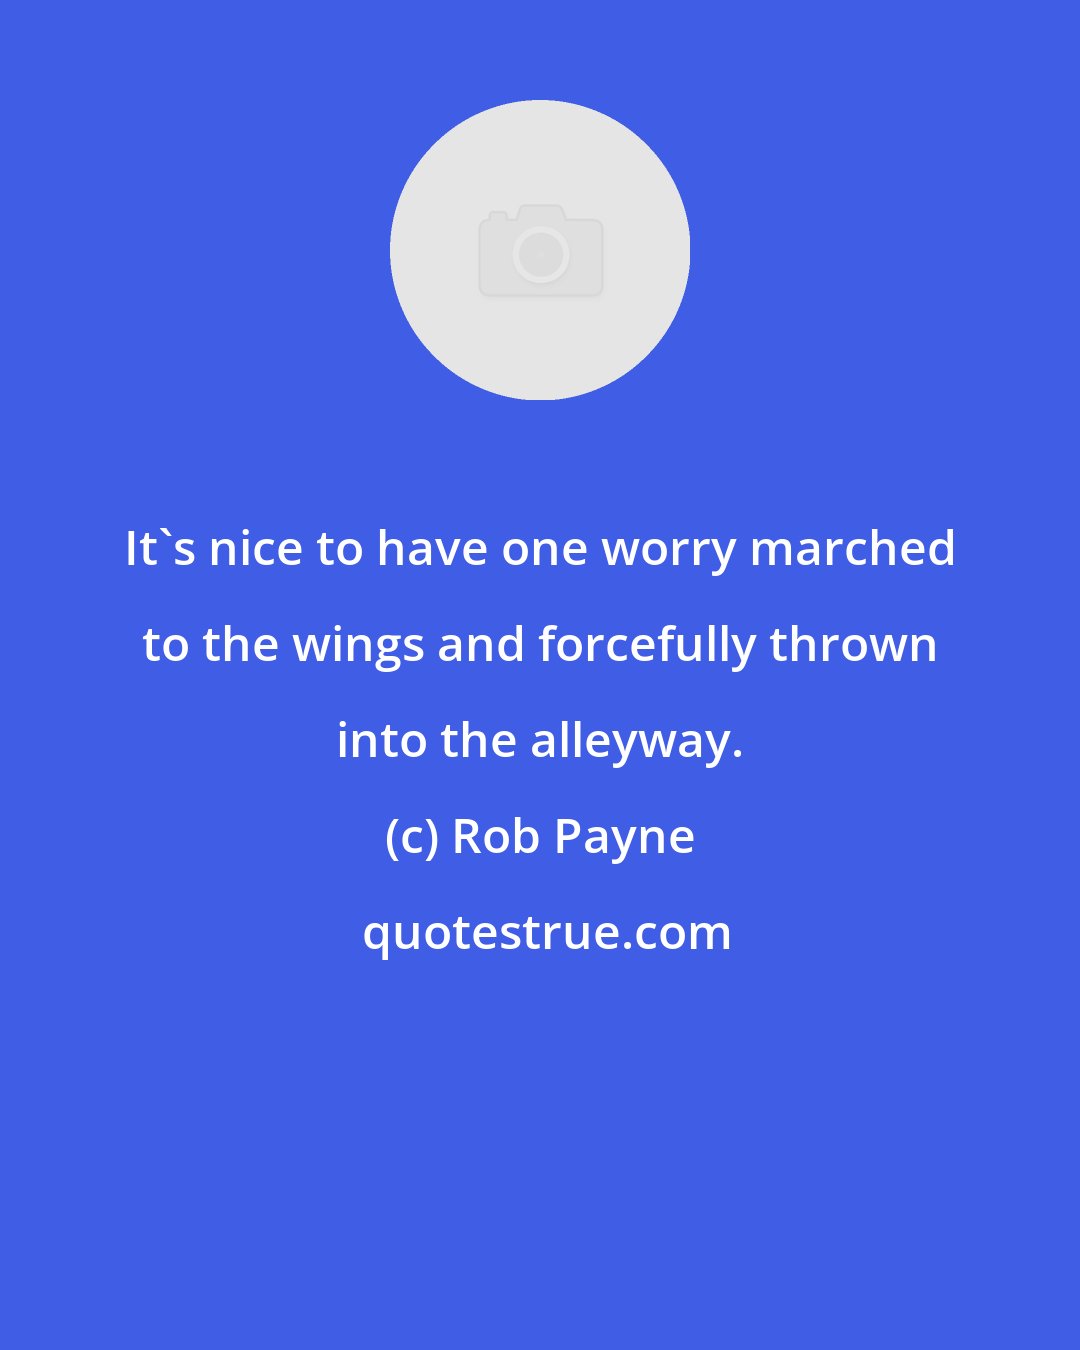 Rob Payne: It's nice to have one worry marched to the wings and forcefully thrown into the alleyway.